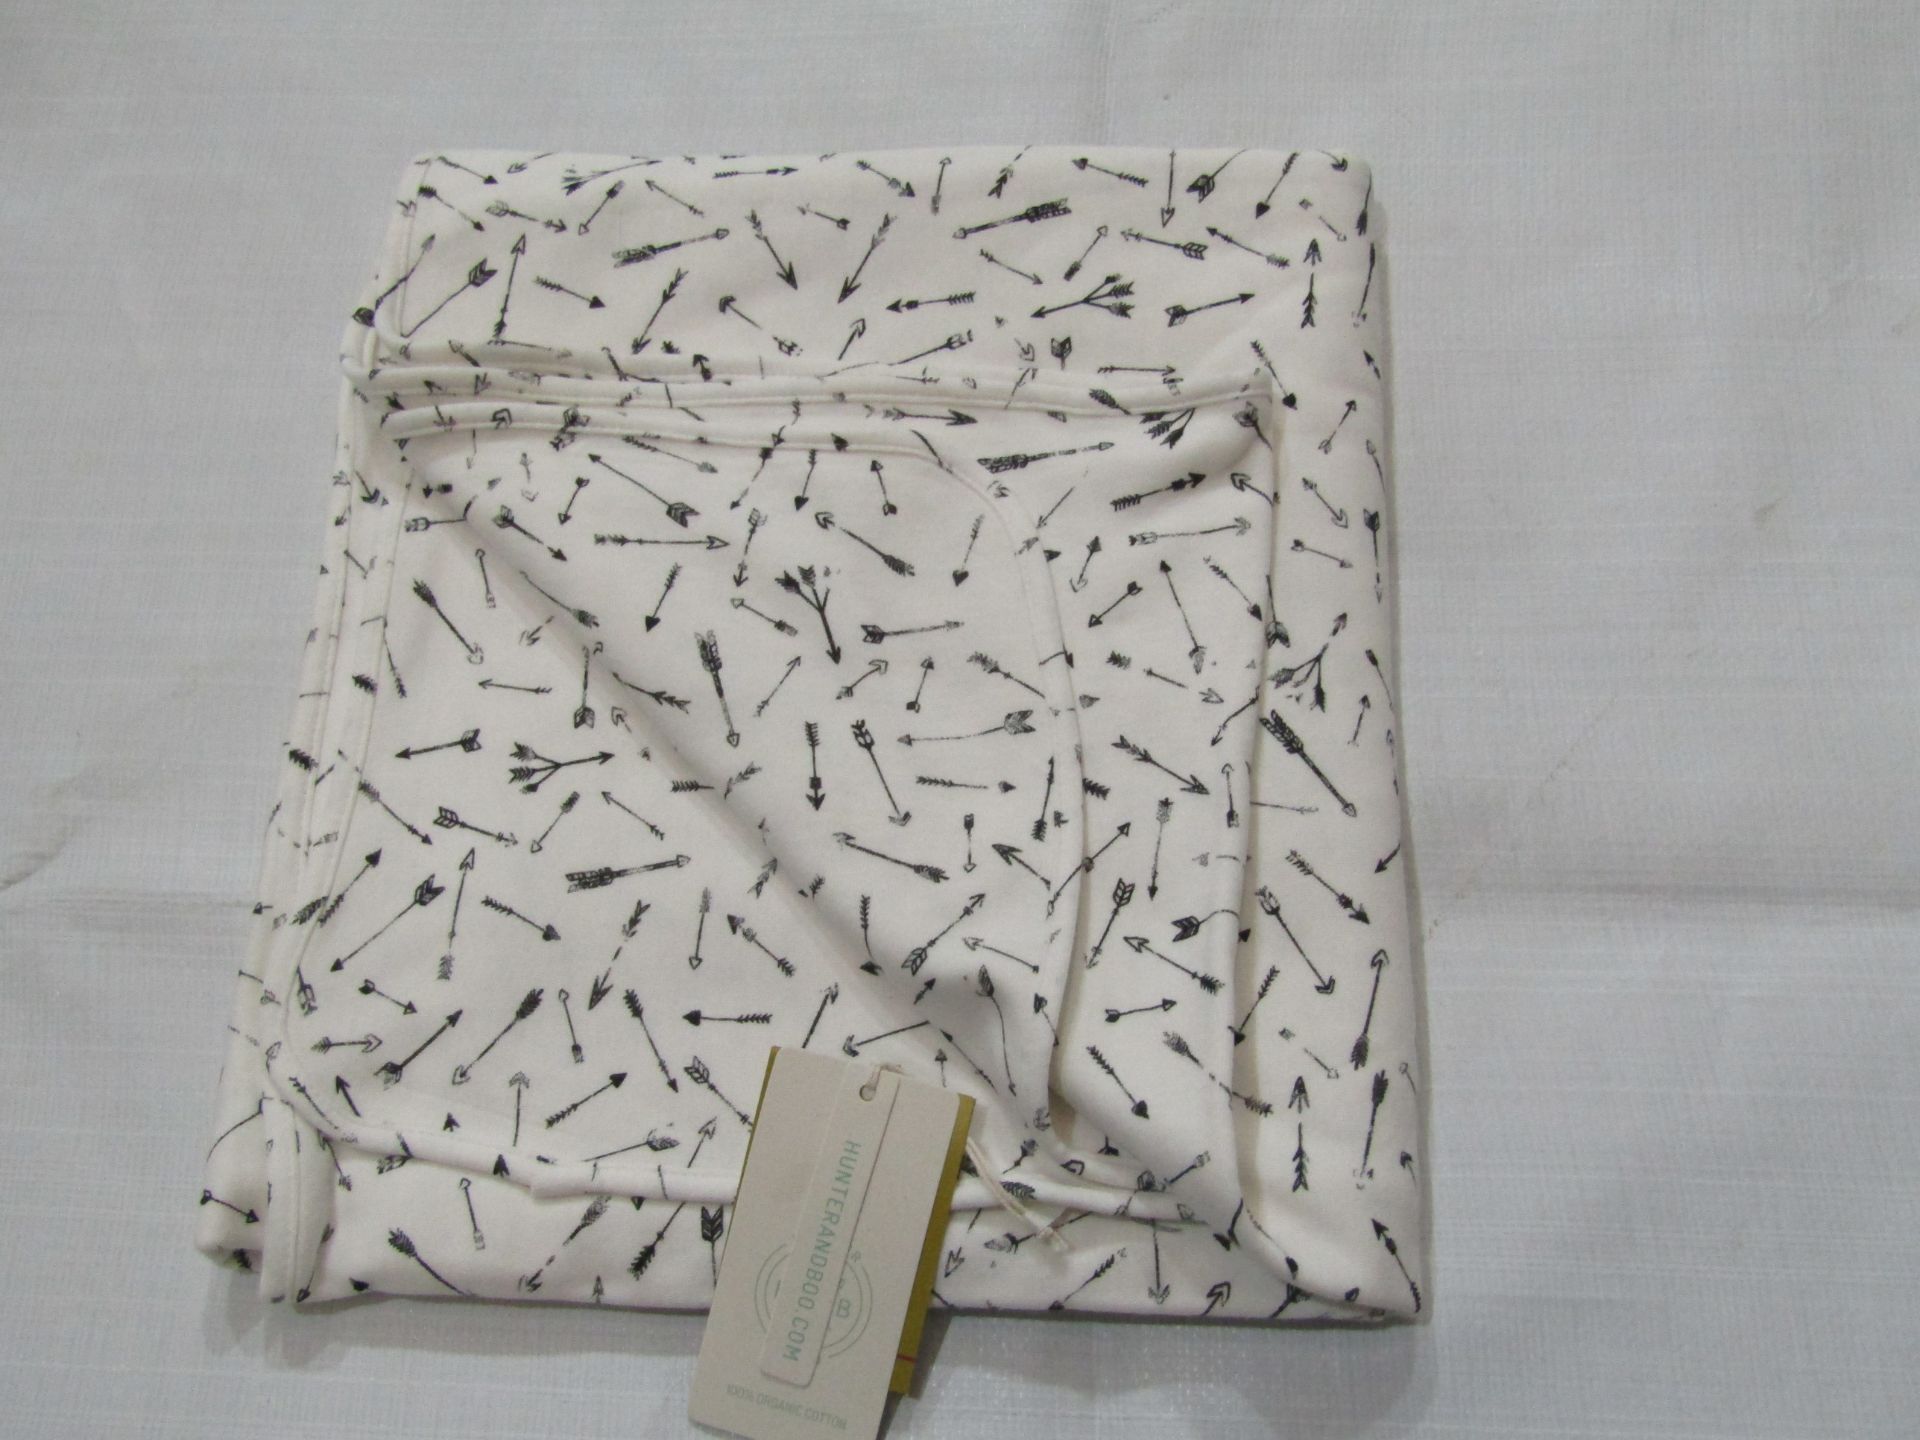 Hunter & Boo Blanket Arrow Print Approx Size 120 X 90 CM 100 % Organic Cotton New & Packaged RRP £